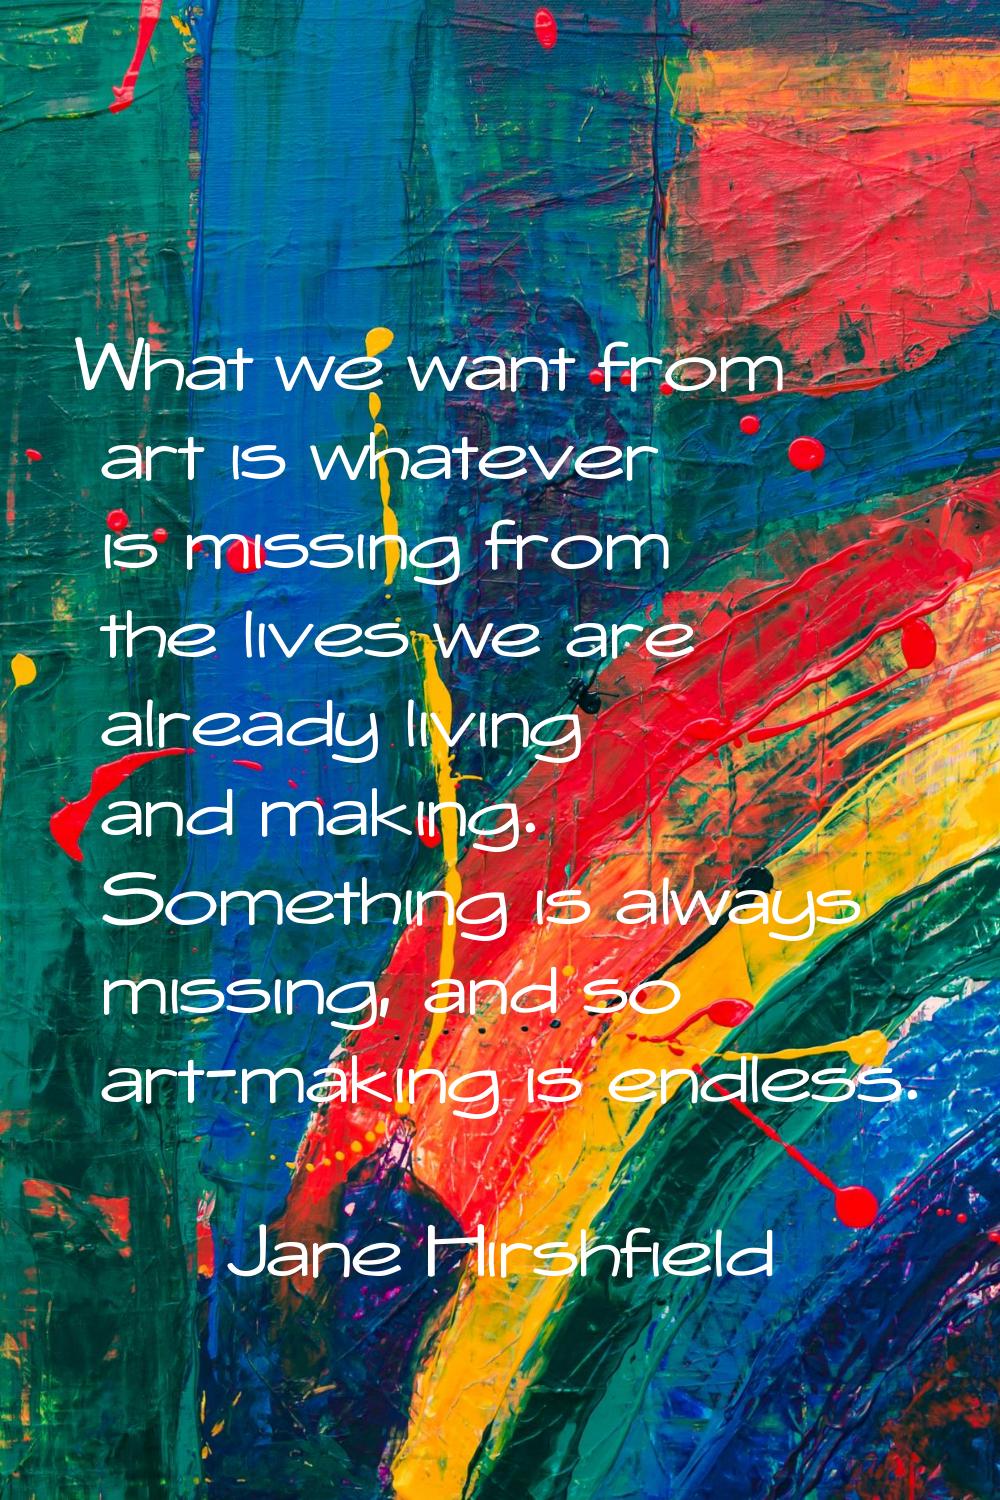 What we want from art is whatever is missing from the lives we are already living and making. Somet